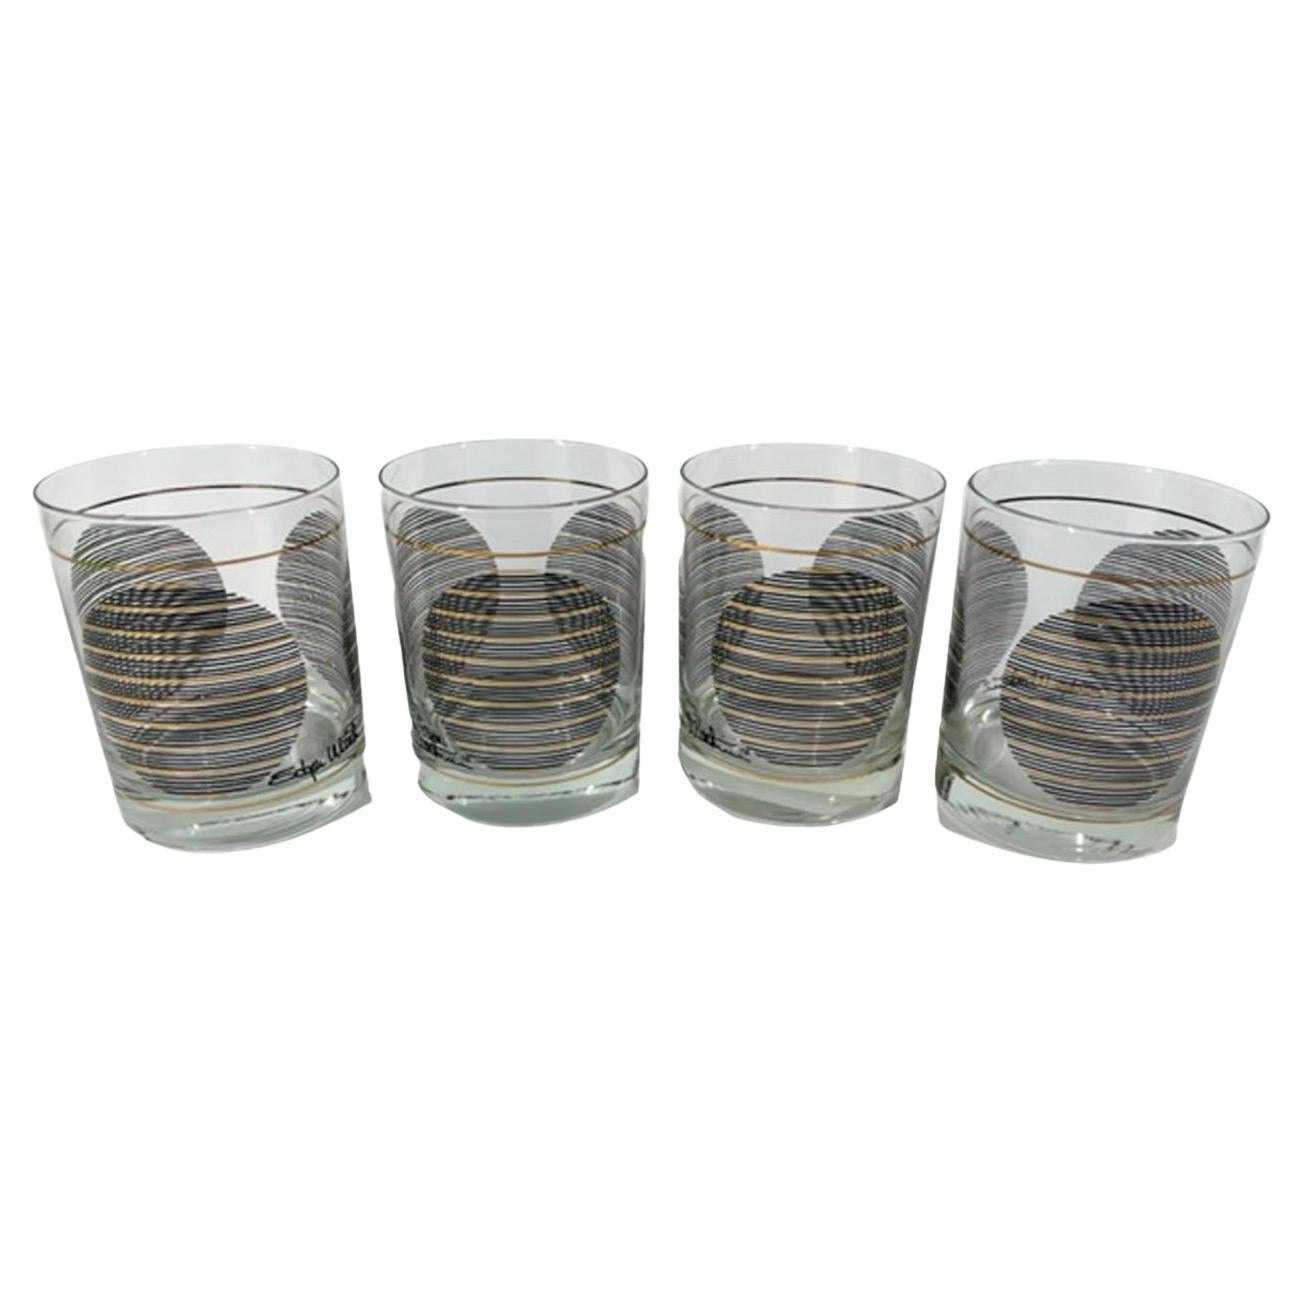 https://a.1stdibscdn.com/four-shelton-ware-double-rocks-glasses-w-black-and-gold-lines-making-circles-for-sale/f_13752/f_271592121643643821305/f_27159212_1643643821608_bg_processed.jpg